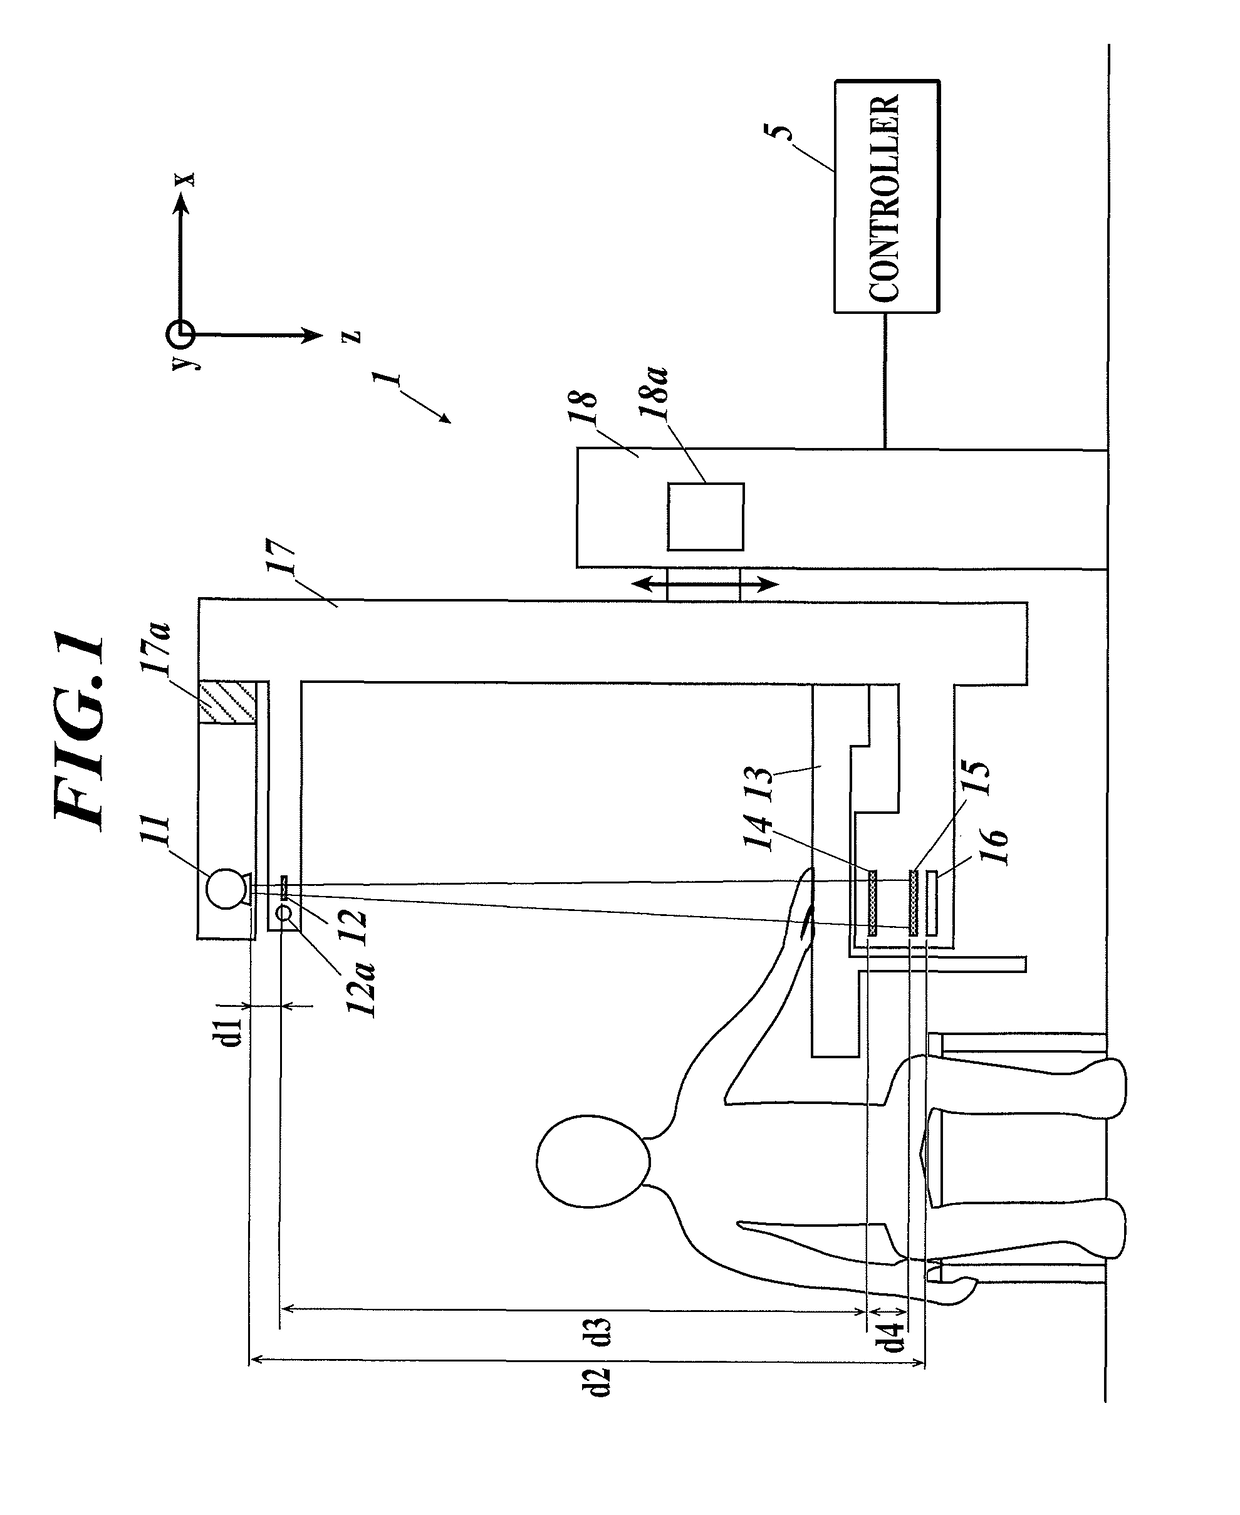 Radiation imaging system and image processing device